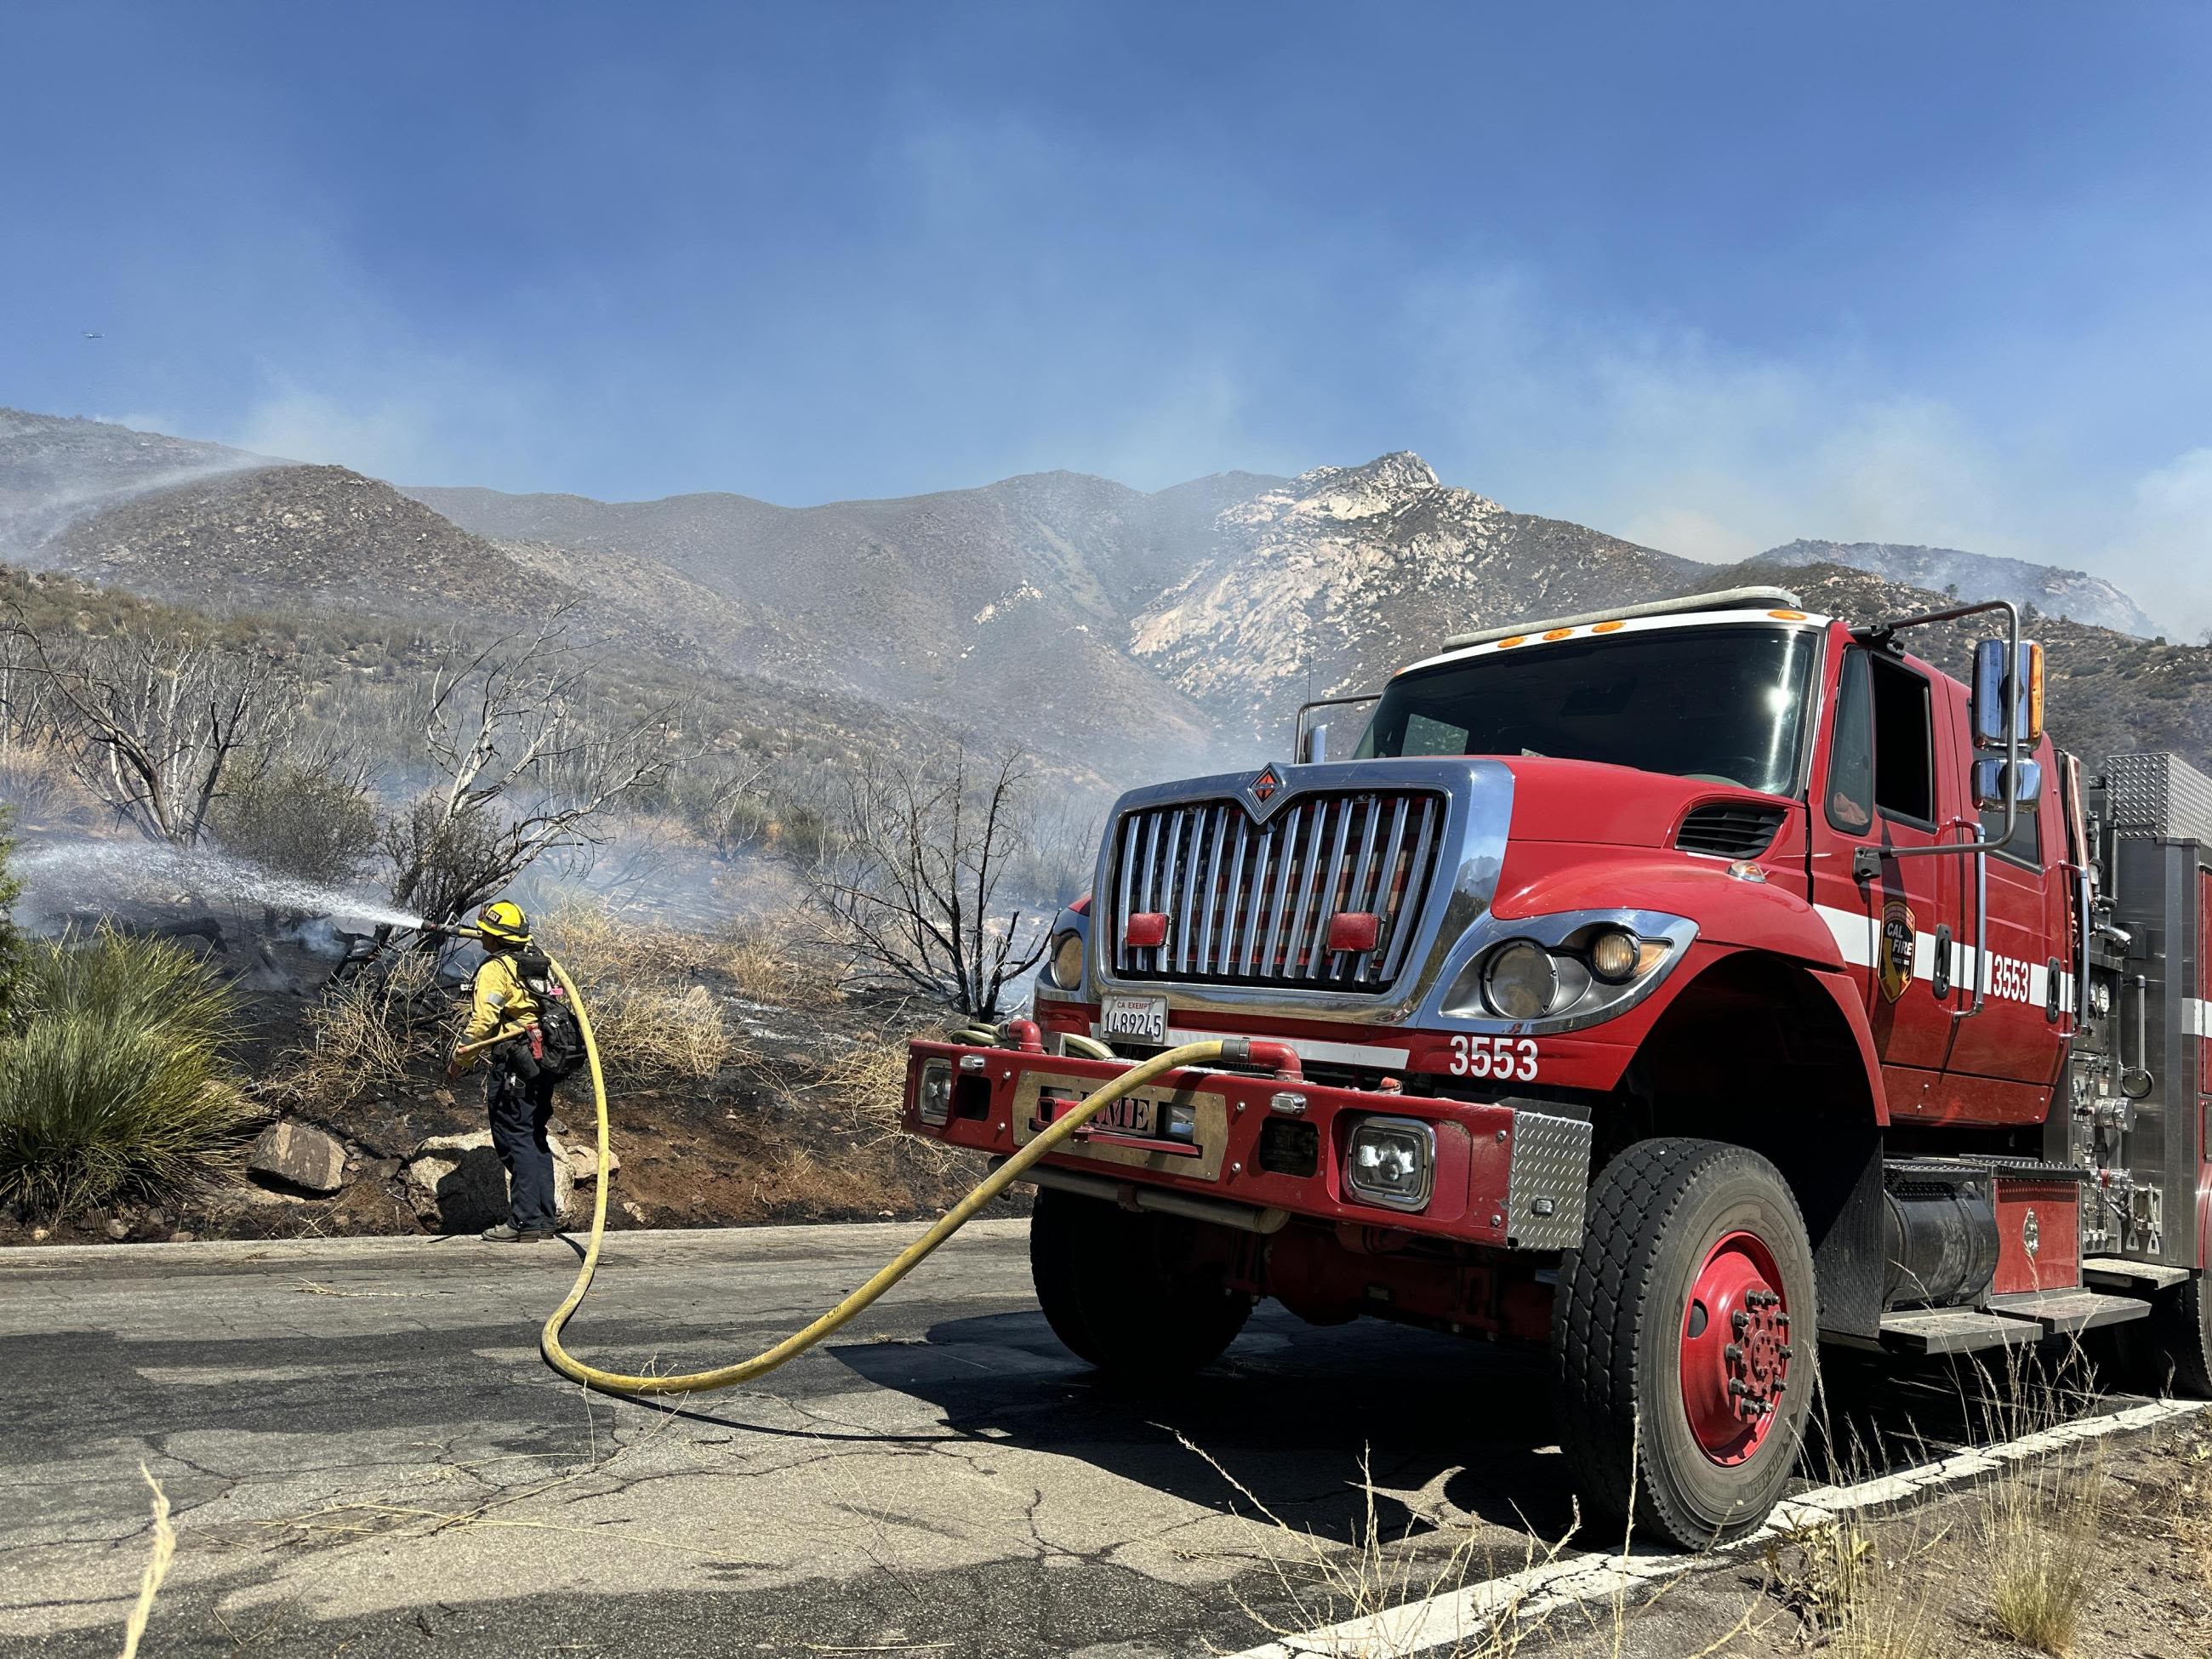 Borel Fire: Kern County blaze grows to 59,340 acres, 68% contained; evacuations in effect Monday